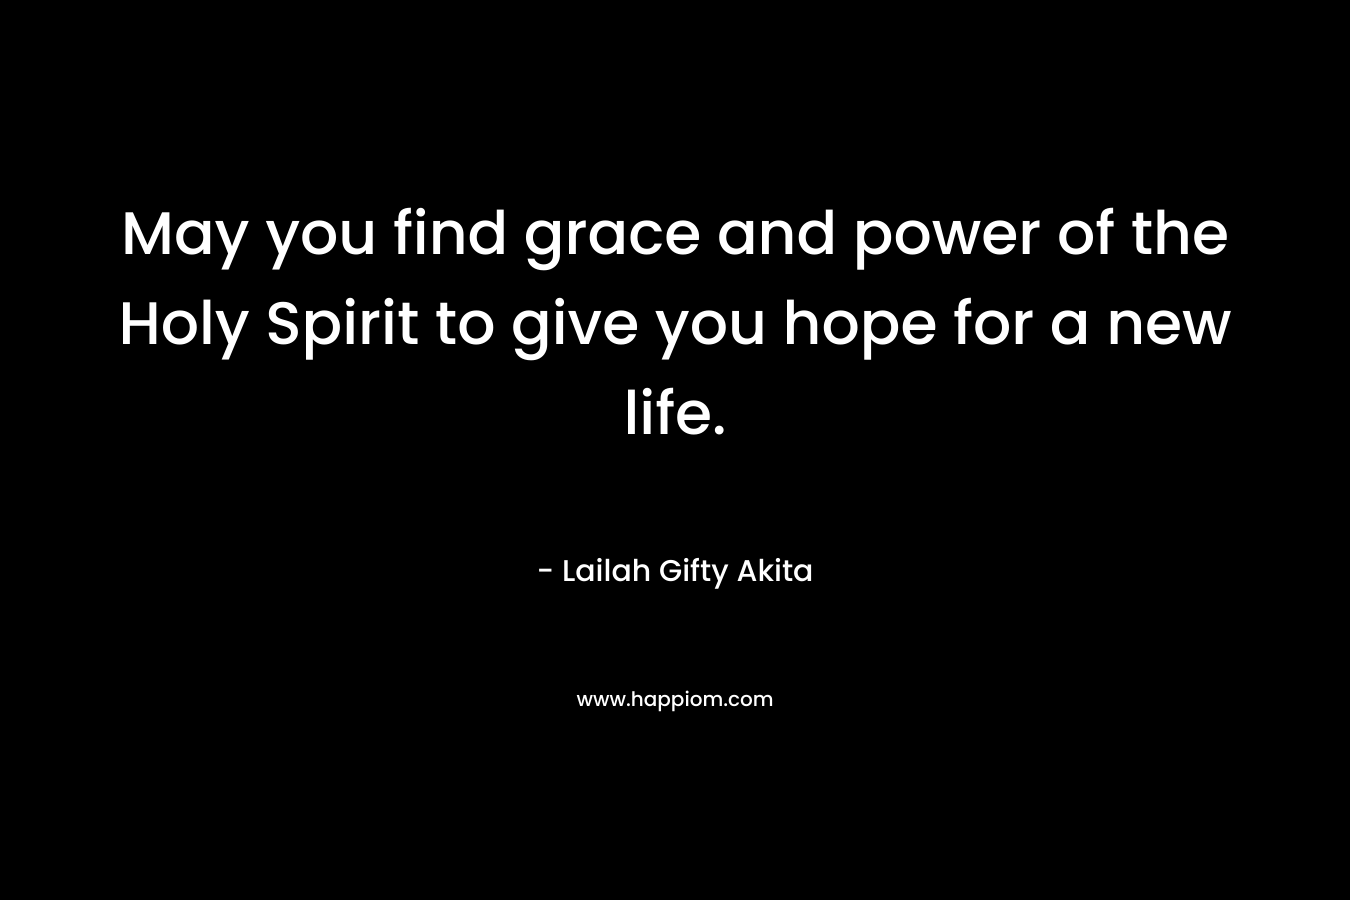 May you find grace and power of the Holy Spirit to give you hope for a new life.